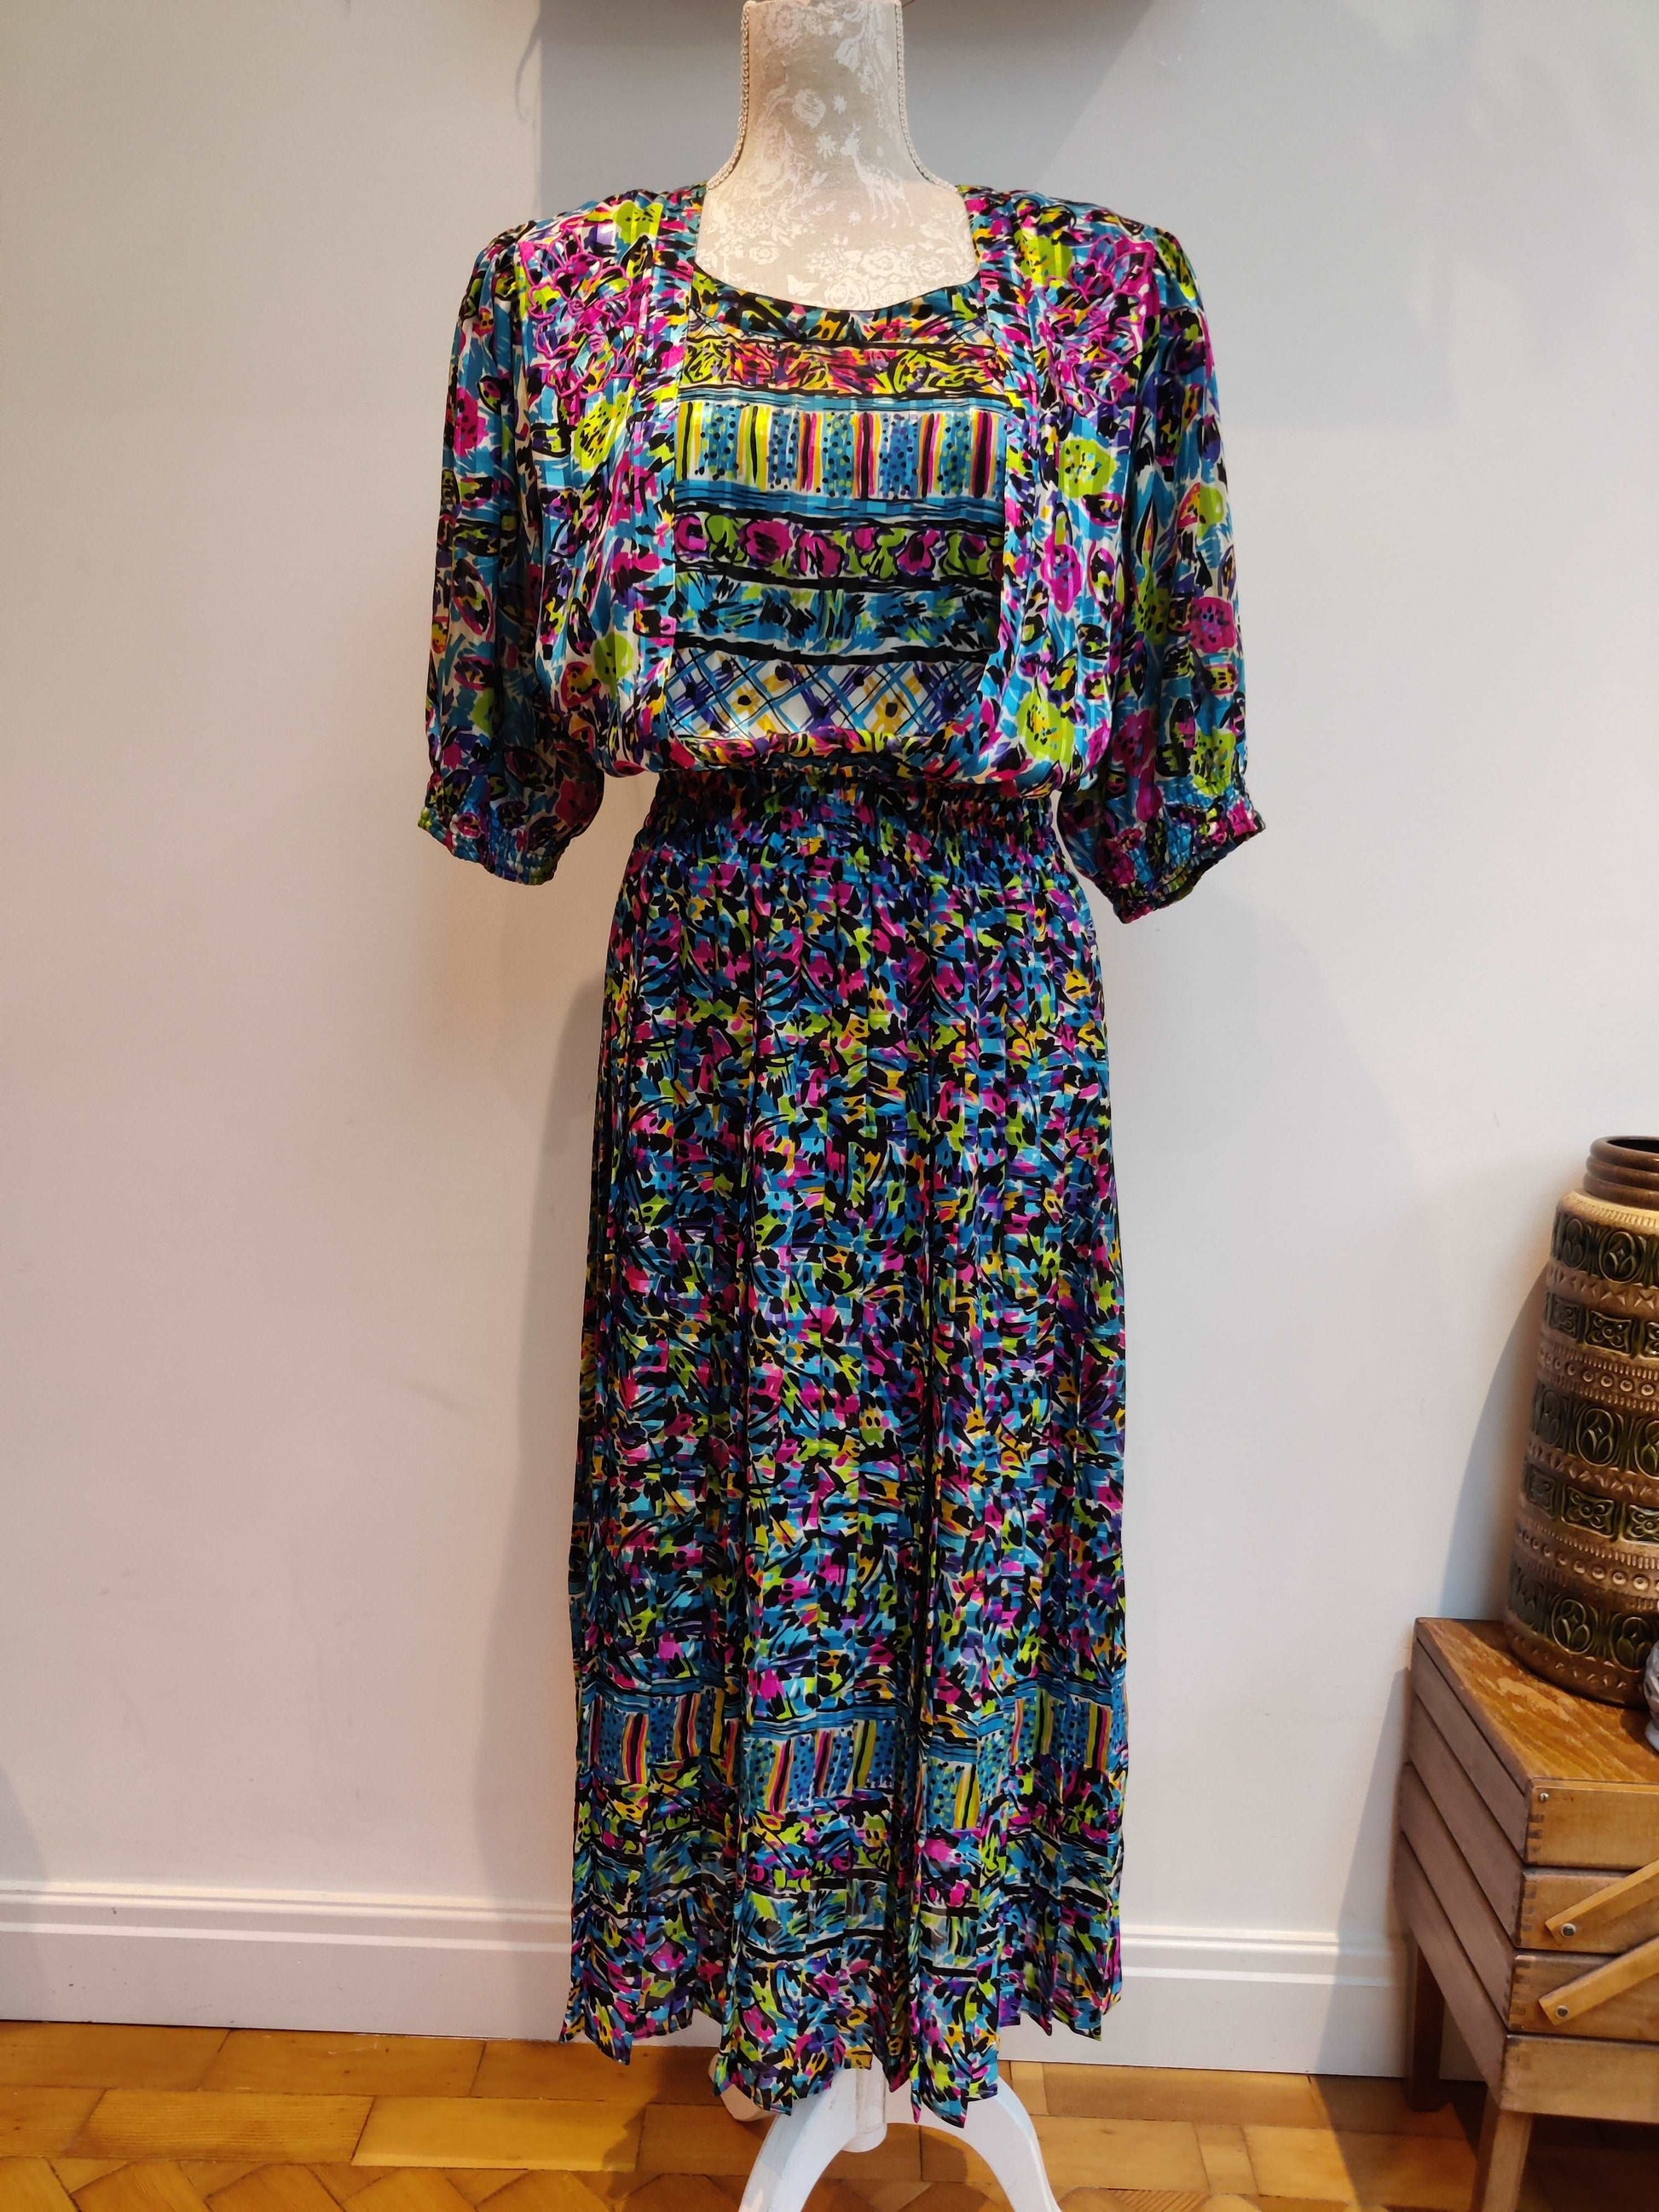 Kanga collections dress in bright 80s print